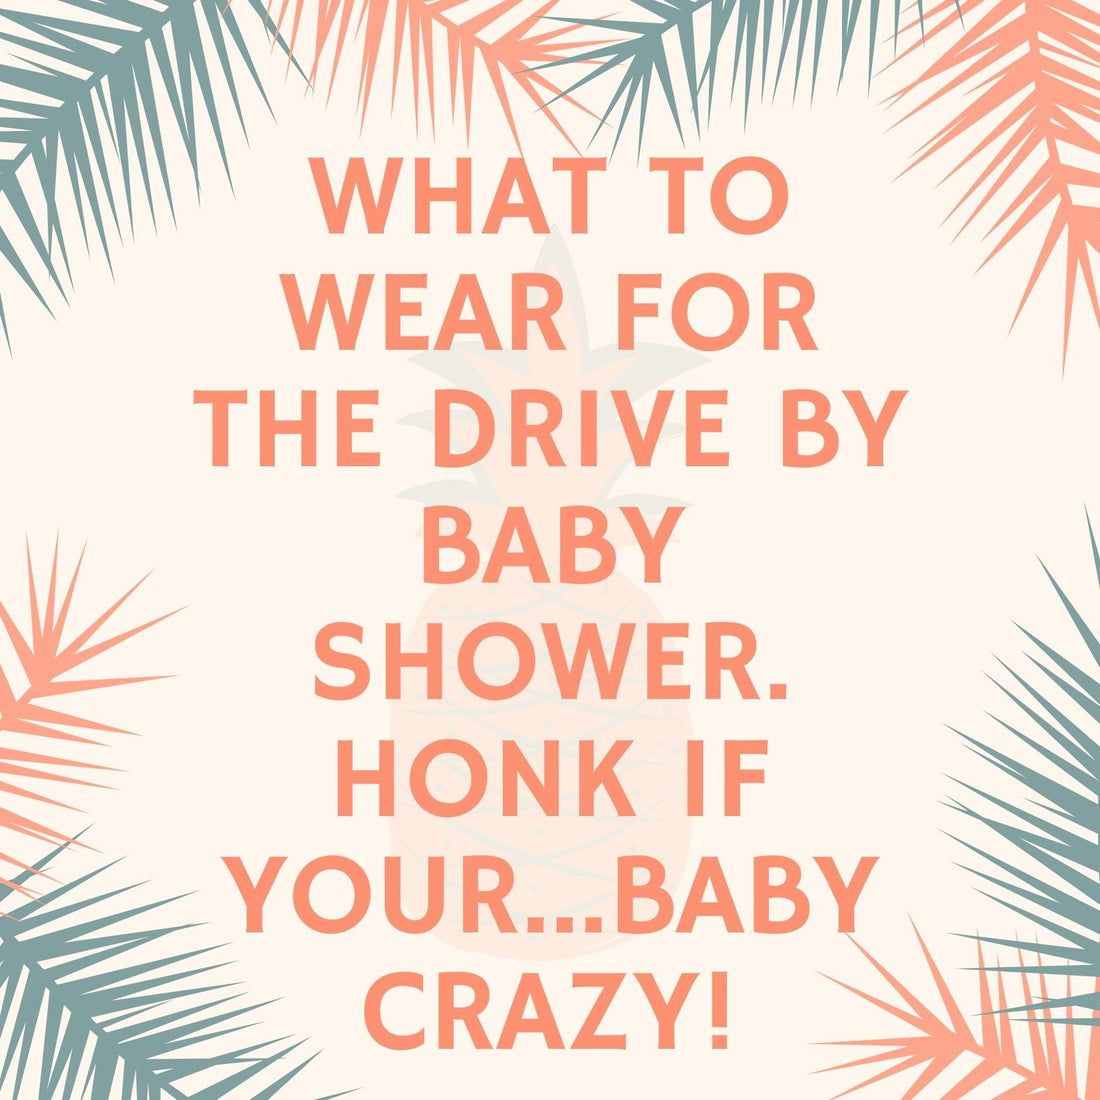 What to Wear for The Drive By Baby Shower. Honk if Your...Baby Crazy!